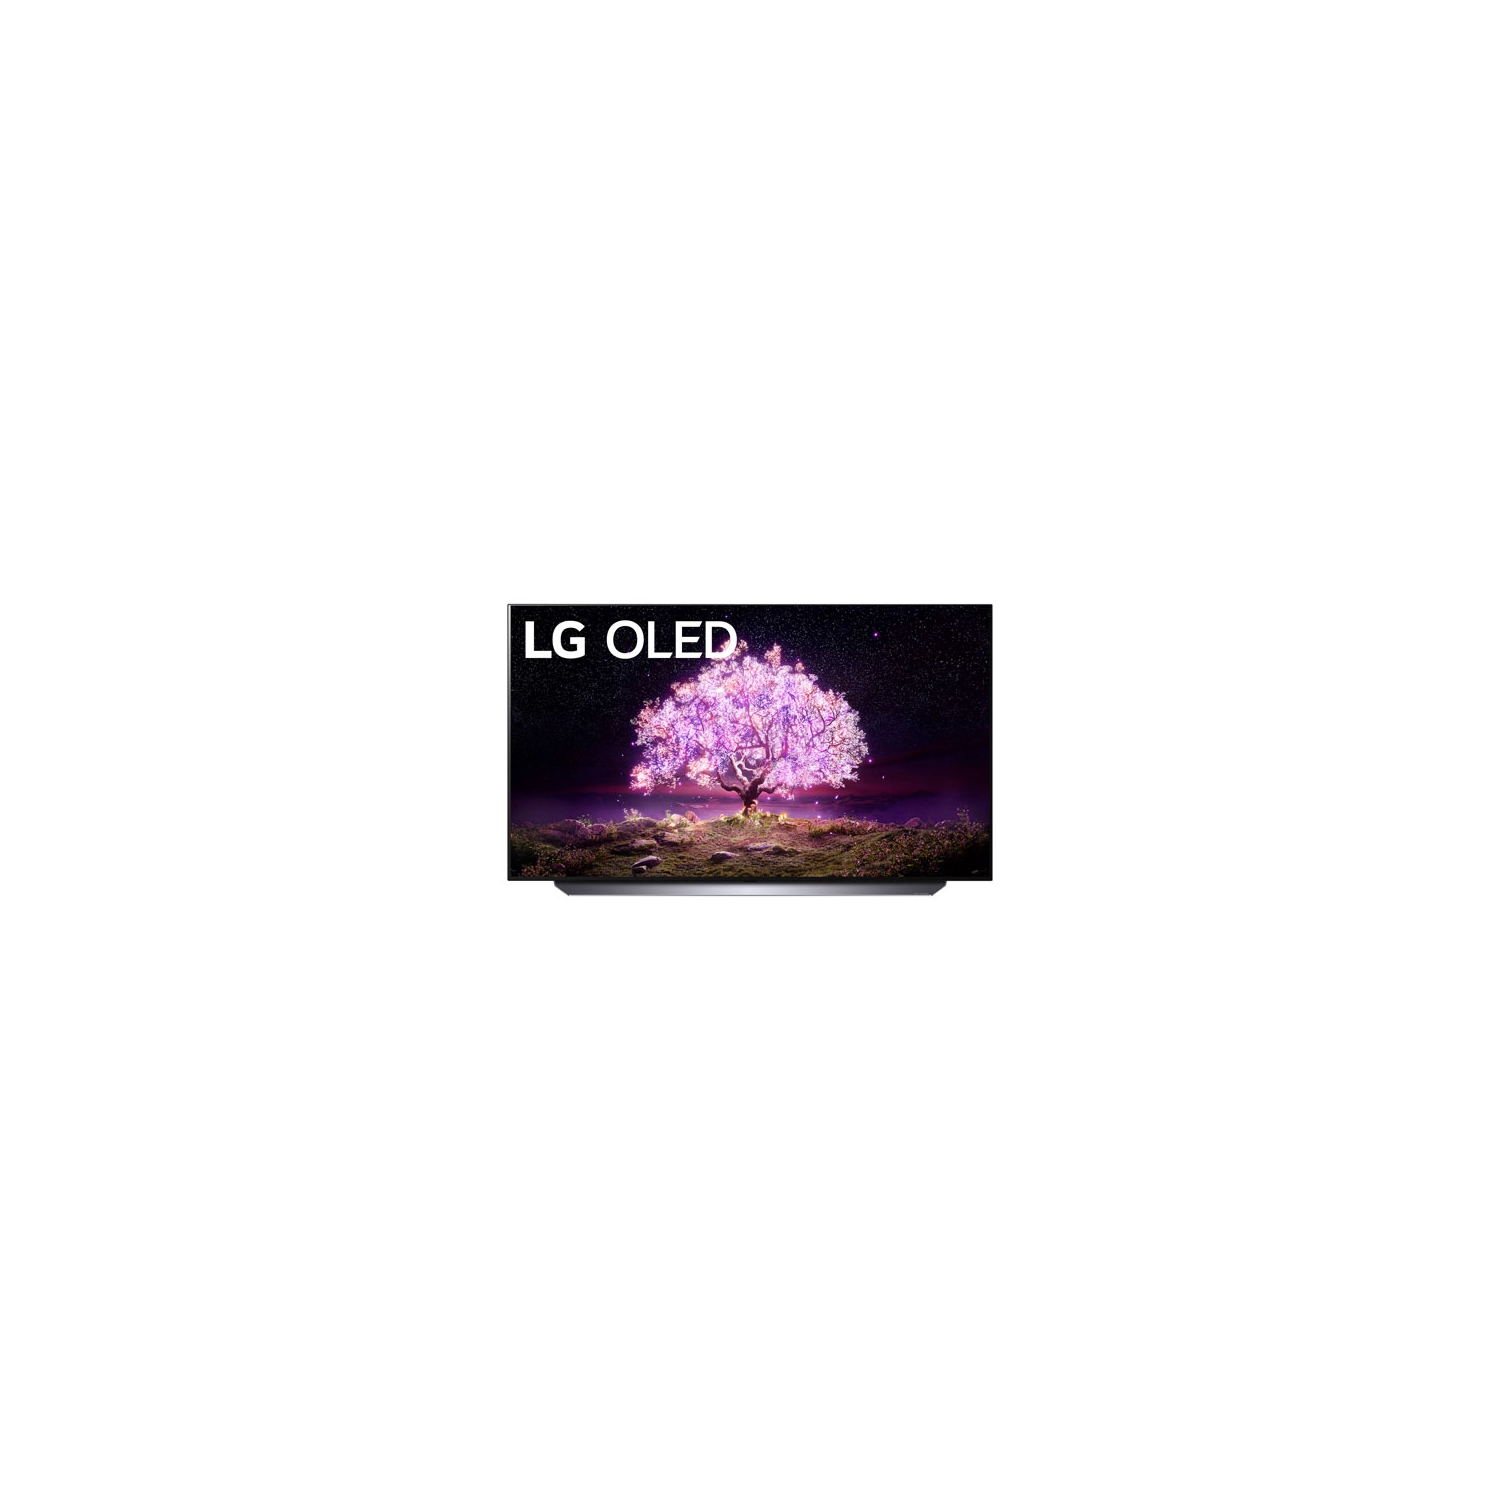 LG 55" 4K UHD HDR OLED webOS Smart TV (OLED55C1AUB) - 2021 - Open Box *LOCAL TORONTO DELIVERY ONLY*